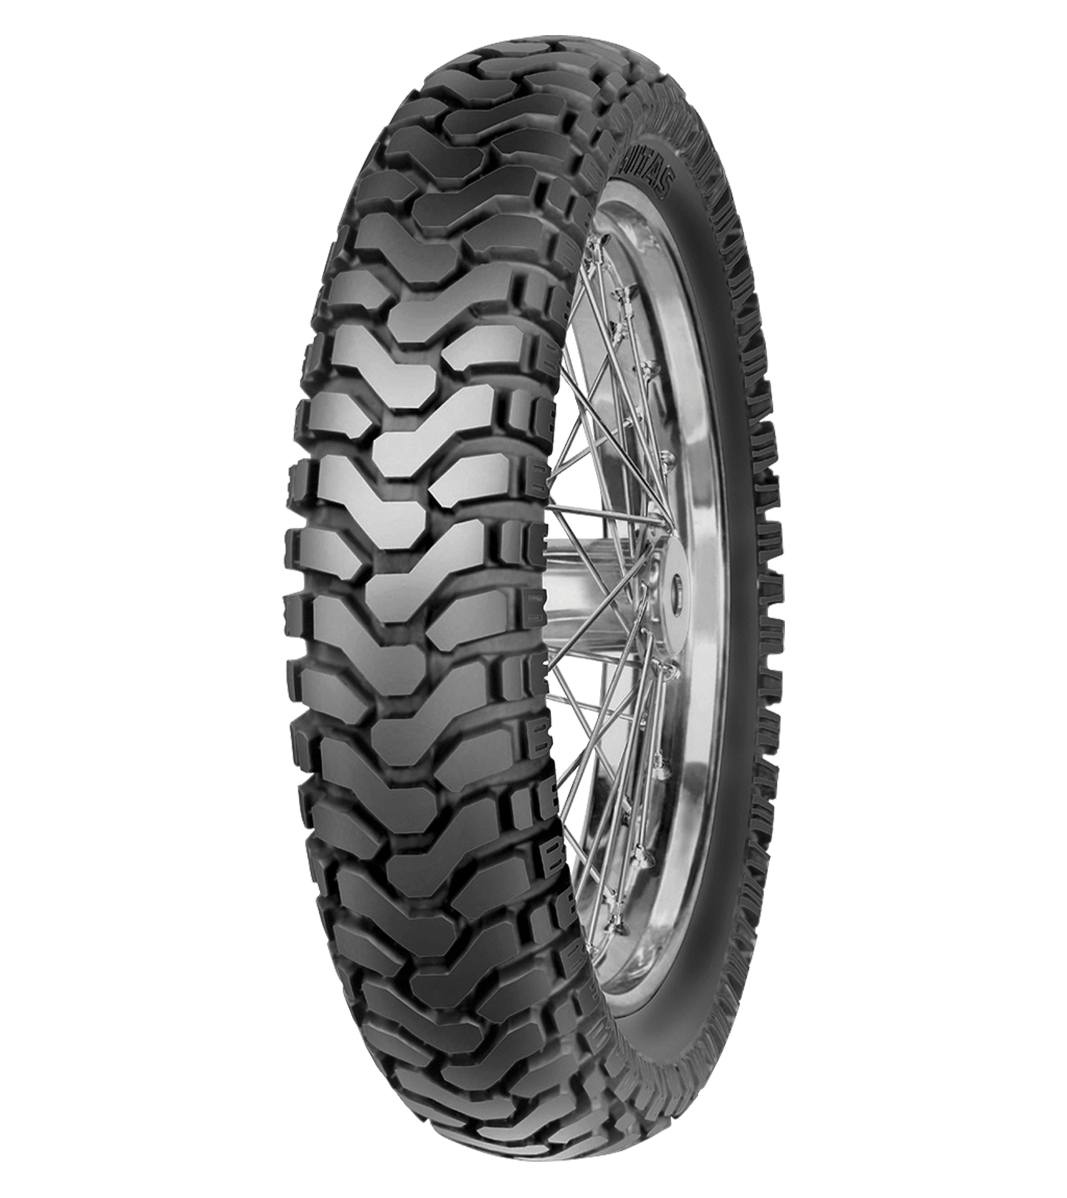 Mitas E-07 ENDURO 130/80-17 Trail OFF Trail 65T No Stripe Tubeless Rear Tire, 224133, 130/80-17, Adventure Touring, E Series, E-07 Enduro, Rear, Trail, Trail OFF, Tires - Imported and distributed in North &amp; South America by Lindeco Genuine Powersports - Premier Powersports Equipment and Accessories for Motorcycle Enthusiasts, Professional Riders and Dealers.